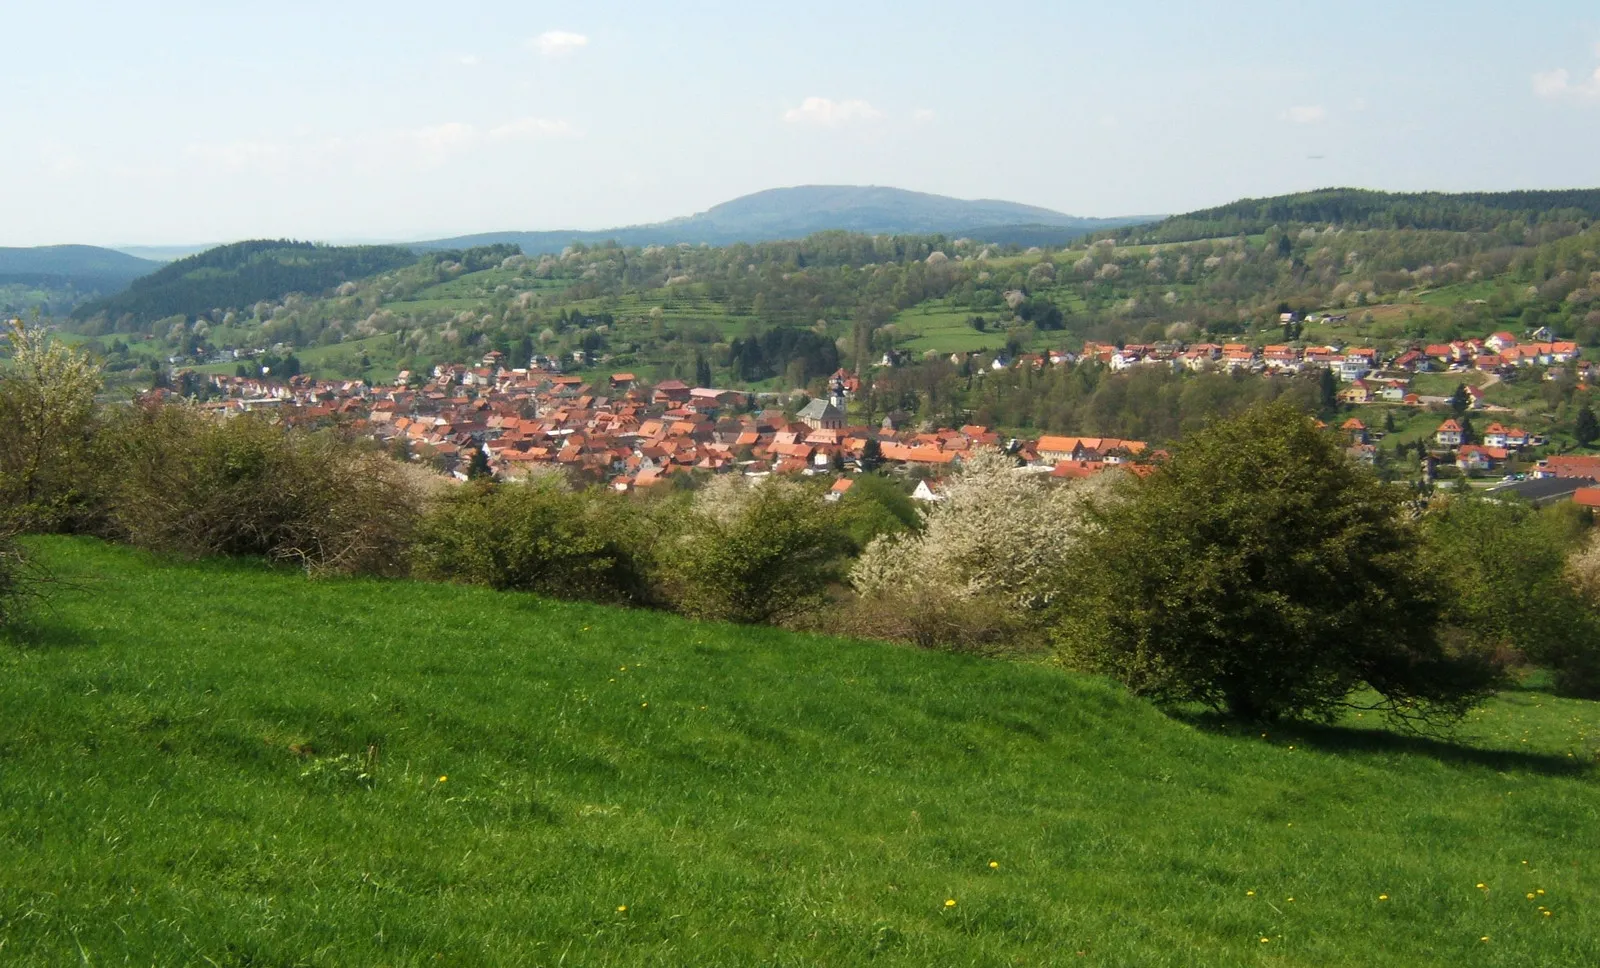 Photo showing: The village de:Benshausen in Thuringia, Germany